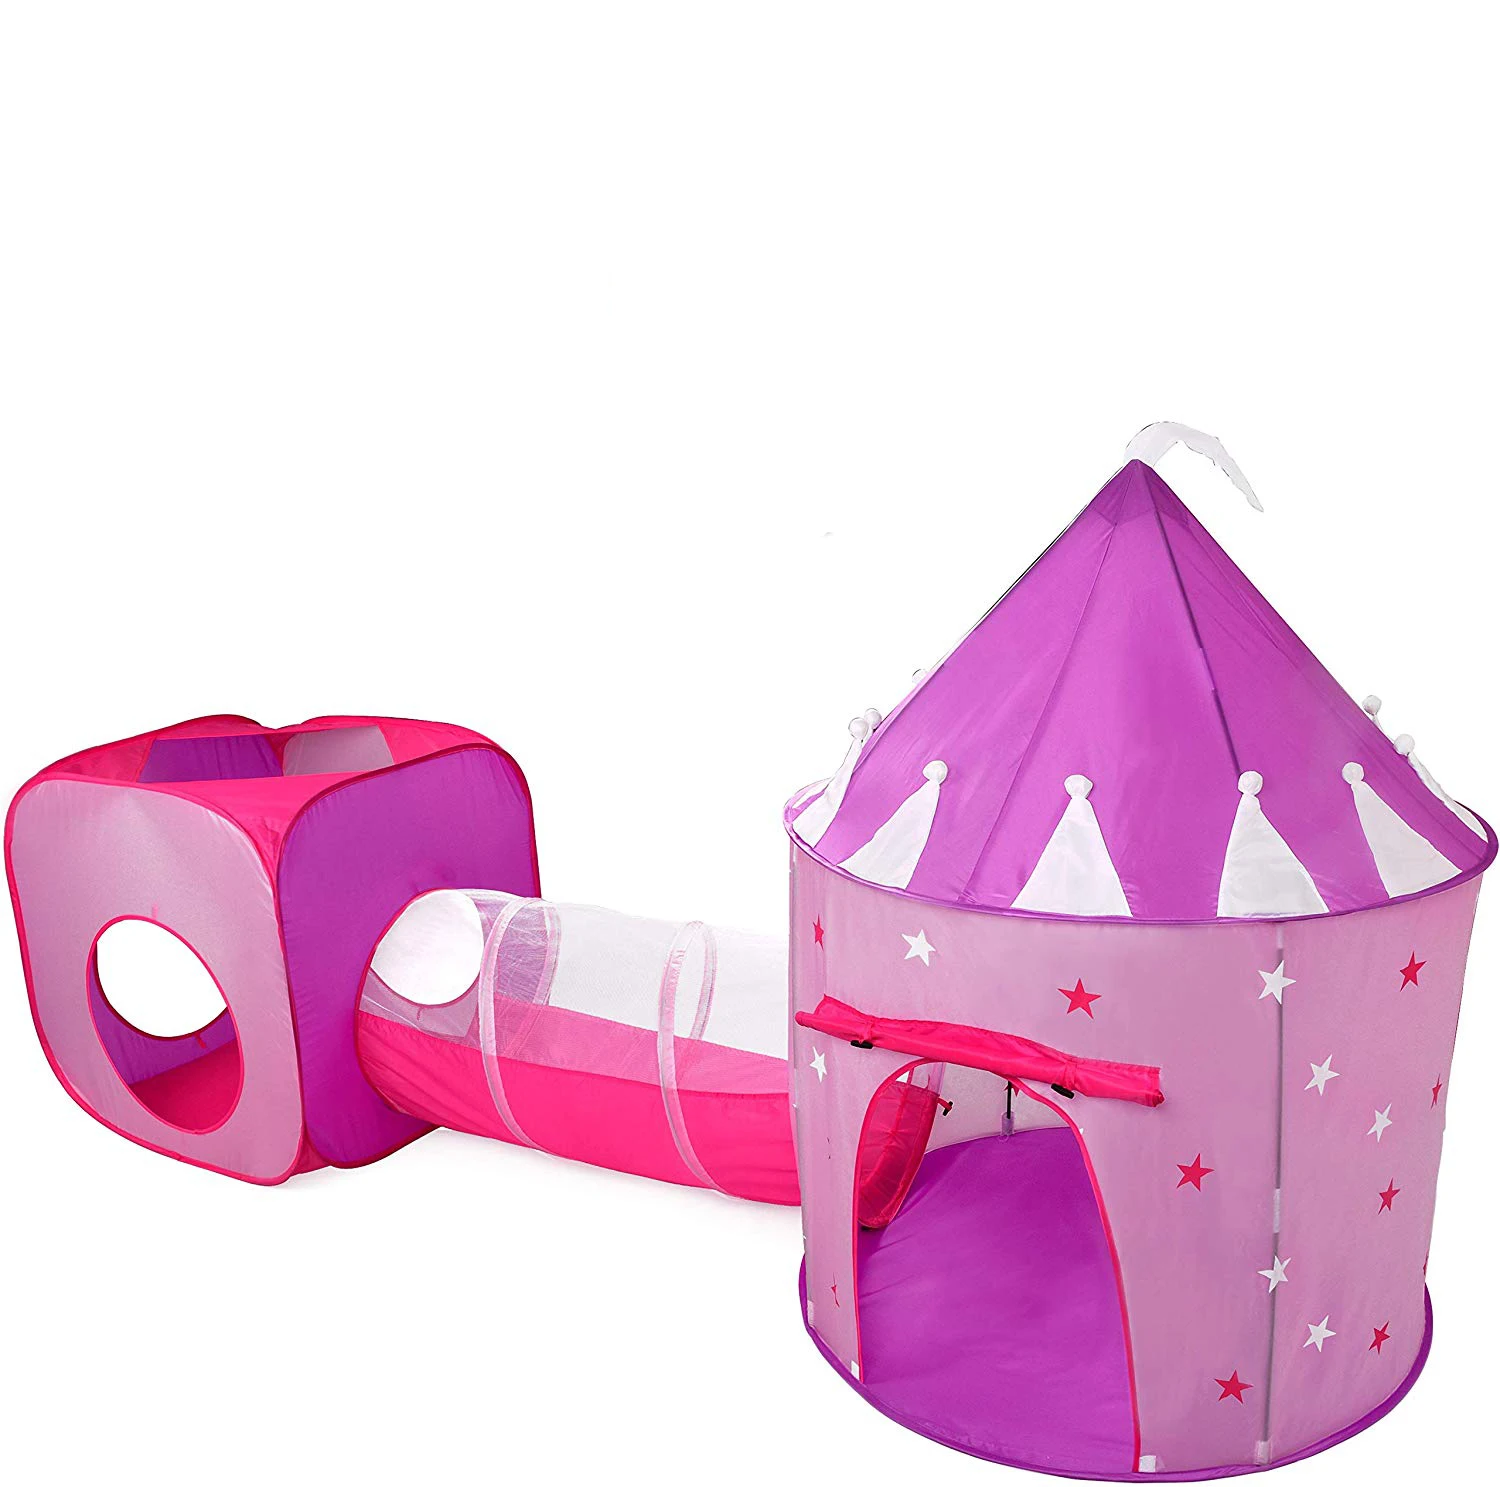 Portable Pop Up Play Tent Kids Girl Princess Castle Outdoor Play House Pink US 